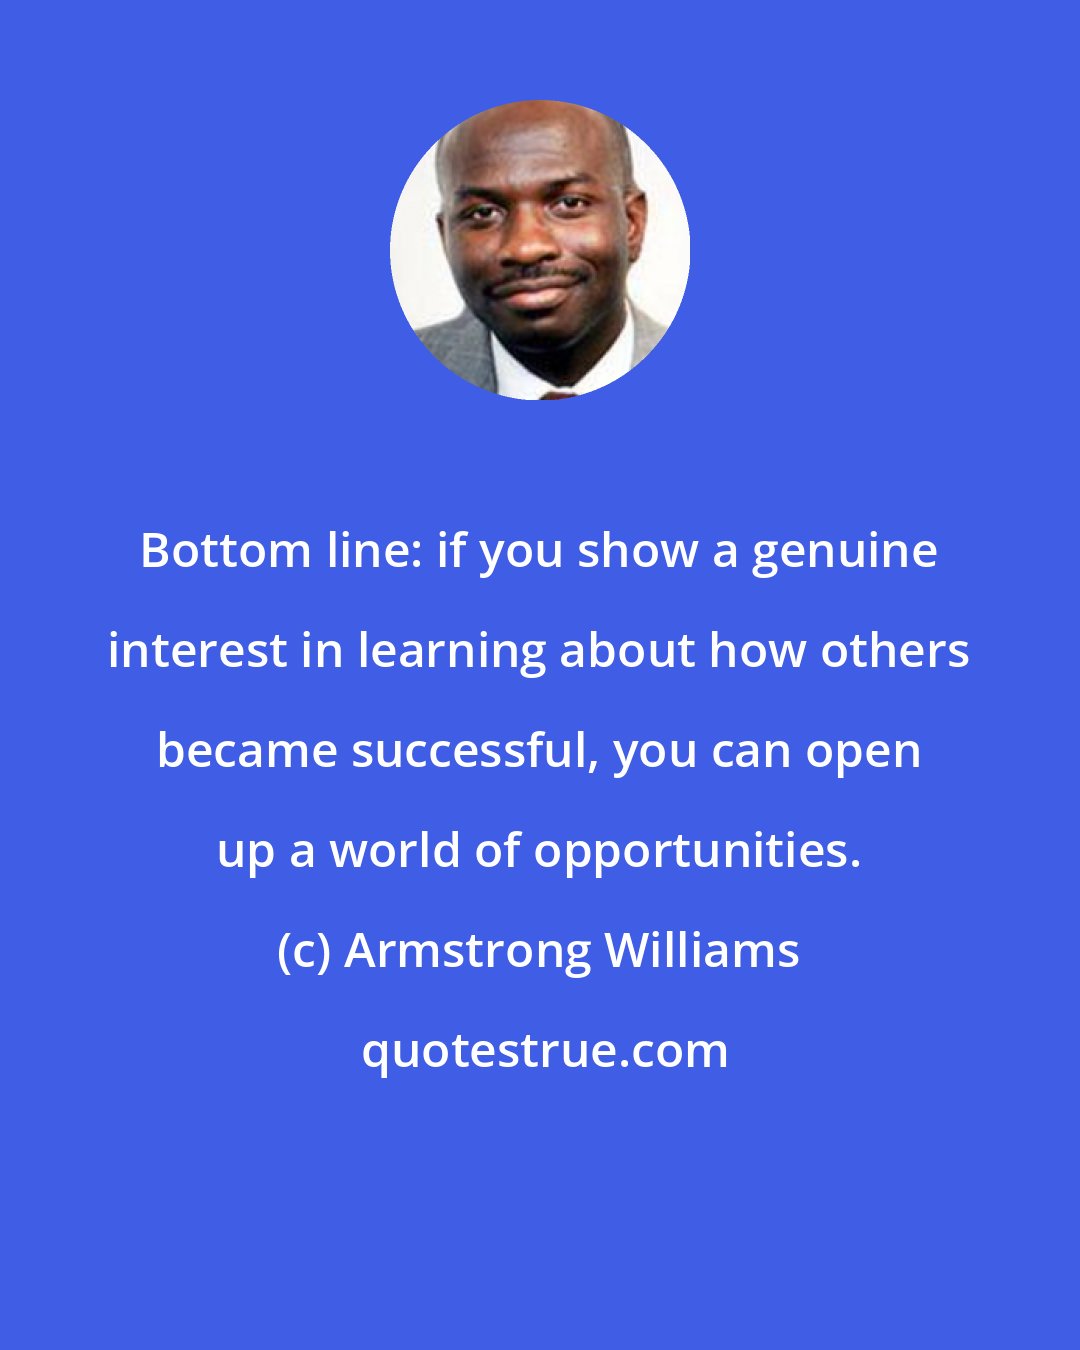 Armstrong Williams: Bottom line: if you show a genuine interest in learning about how others became successful, you can open up a world of opportunities.